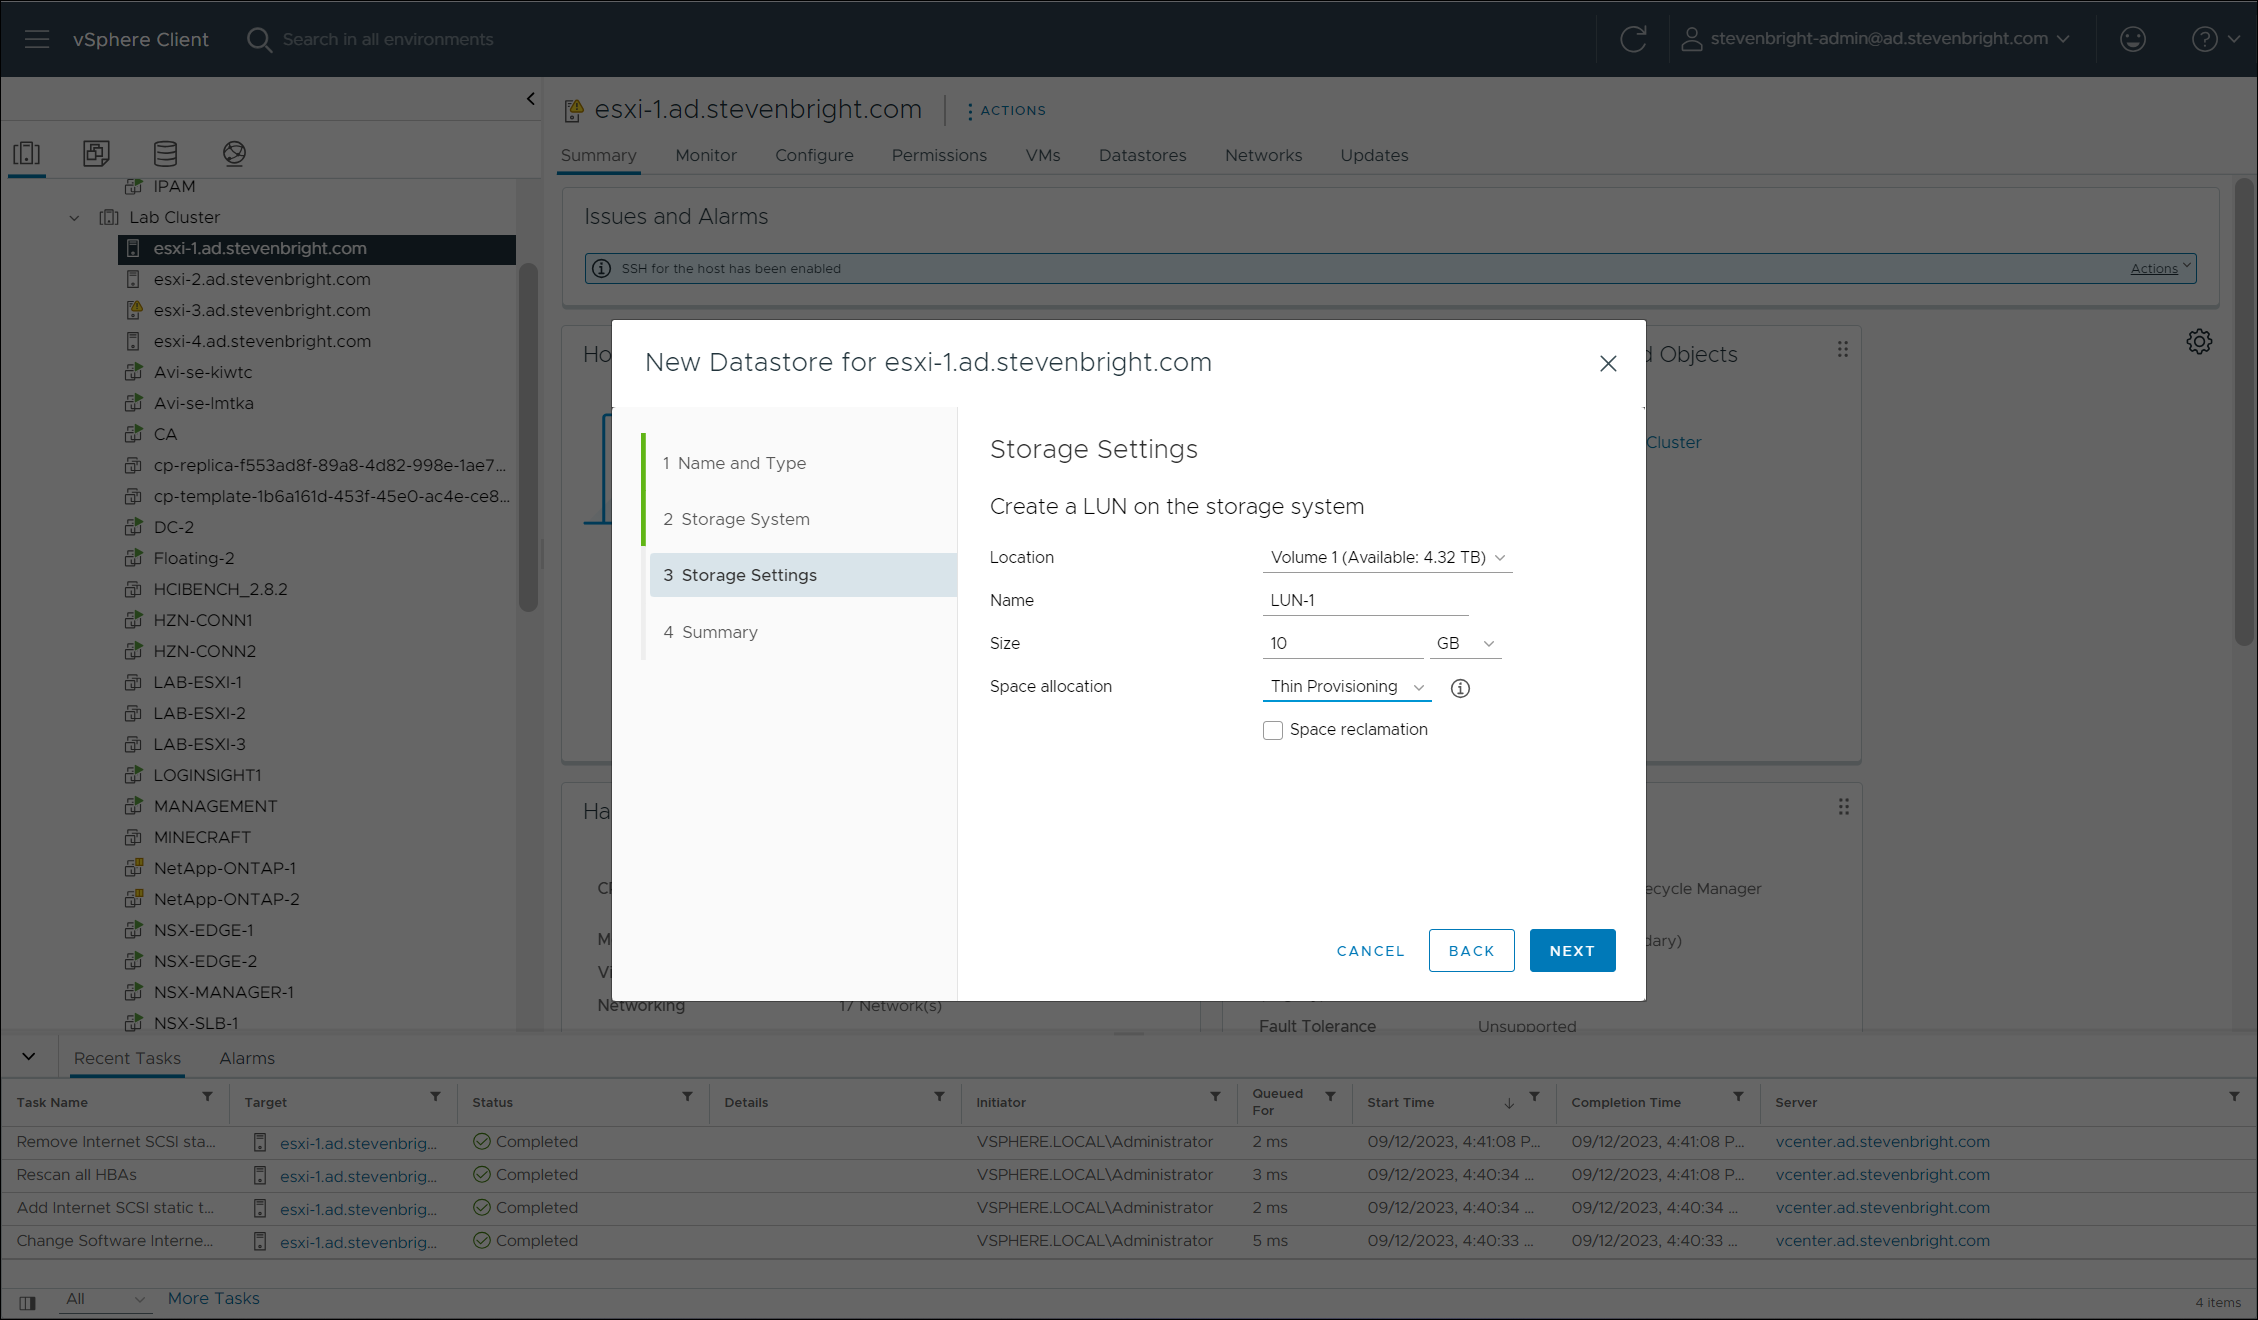 VMware vSphere Client - Synology Storage Console Optimize - New Datastore Wizard - Step 3 - iSCSI